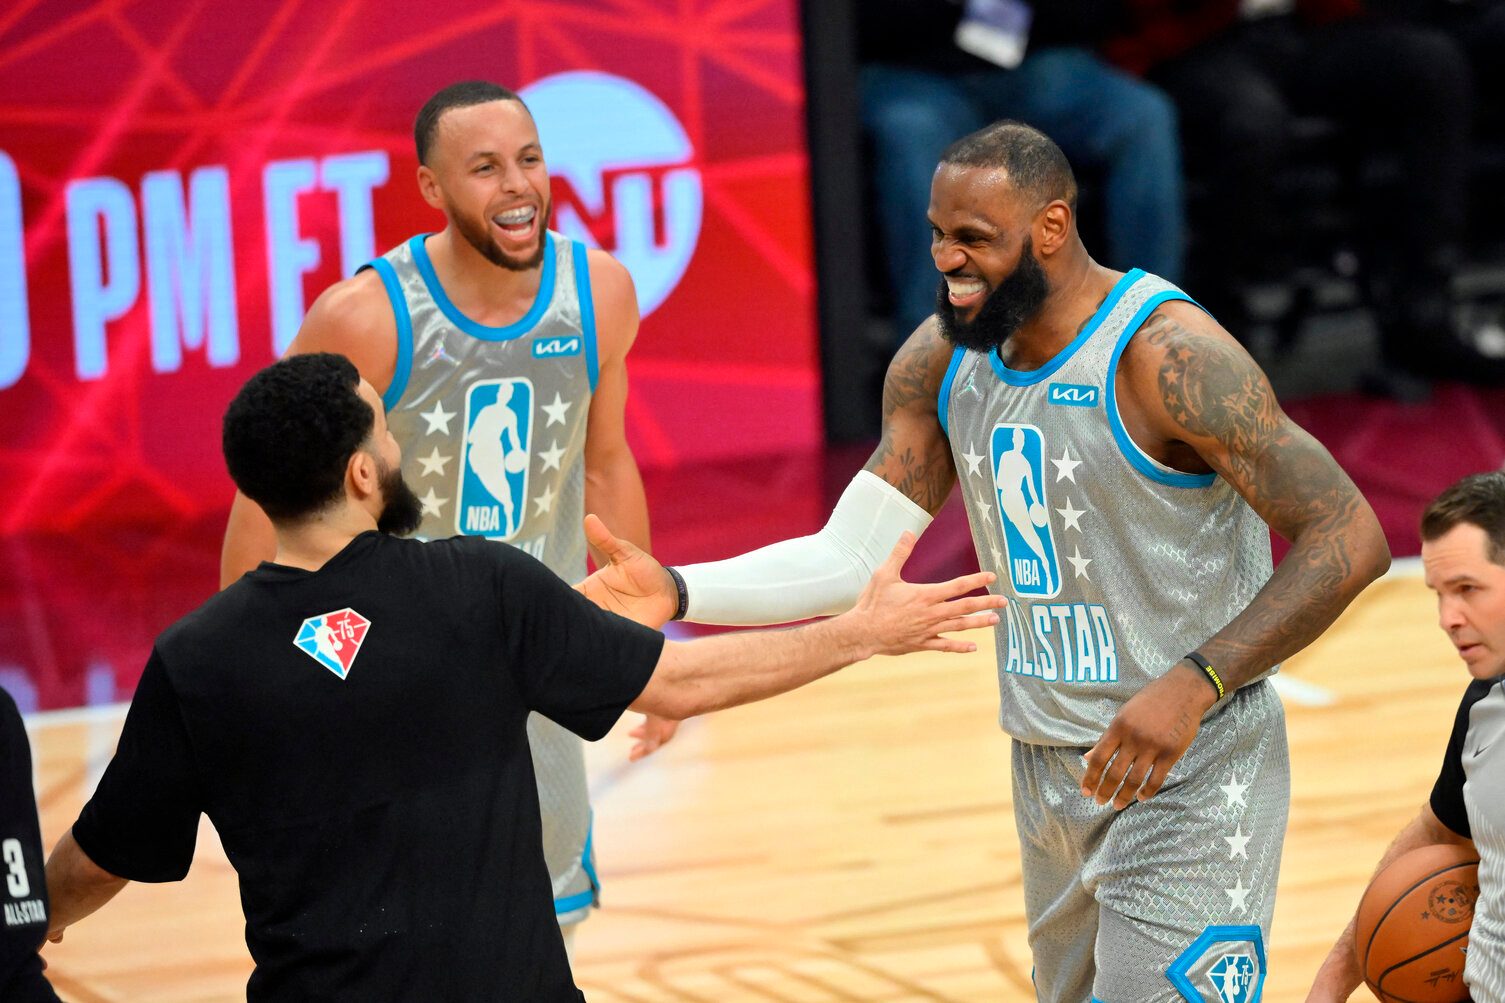 Warriors star Stephen Curry shares his ‘perfect’ message to LeBron James after All-Star Game victory